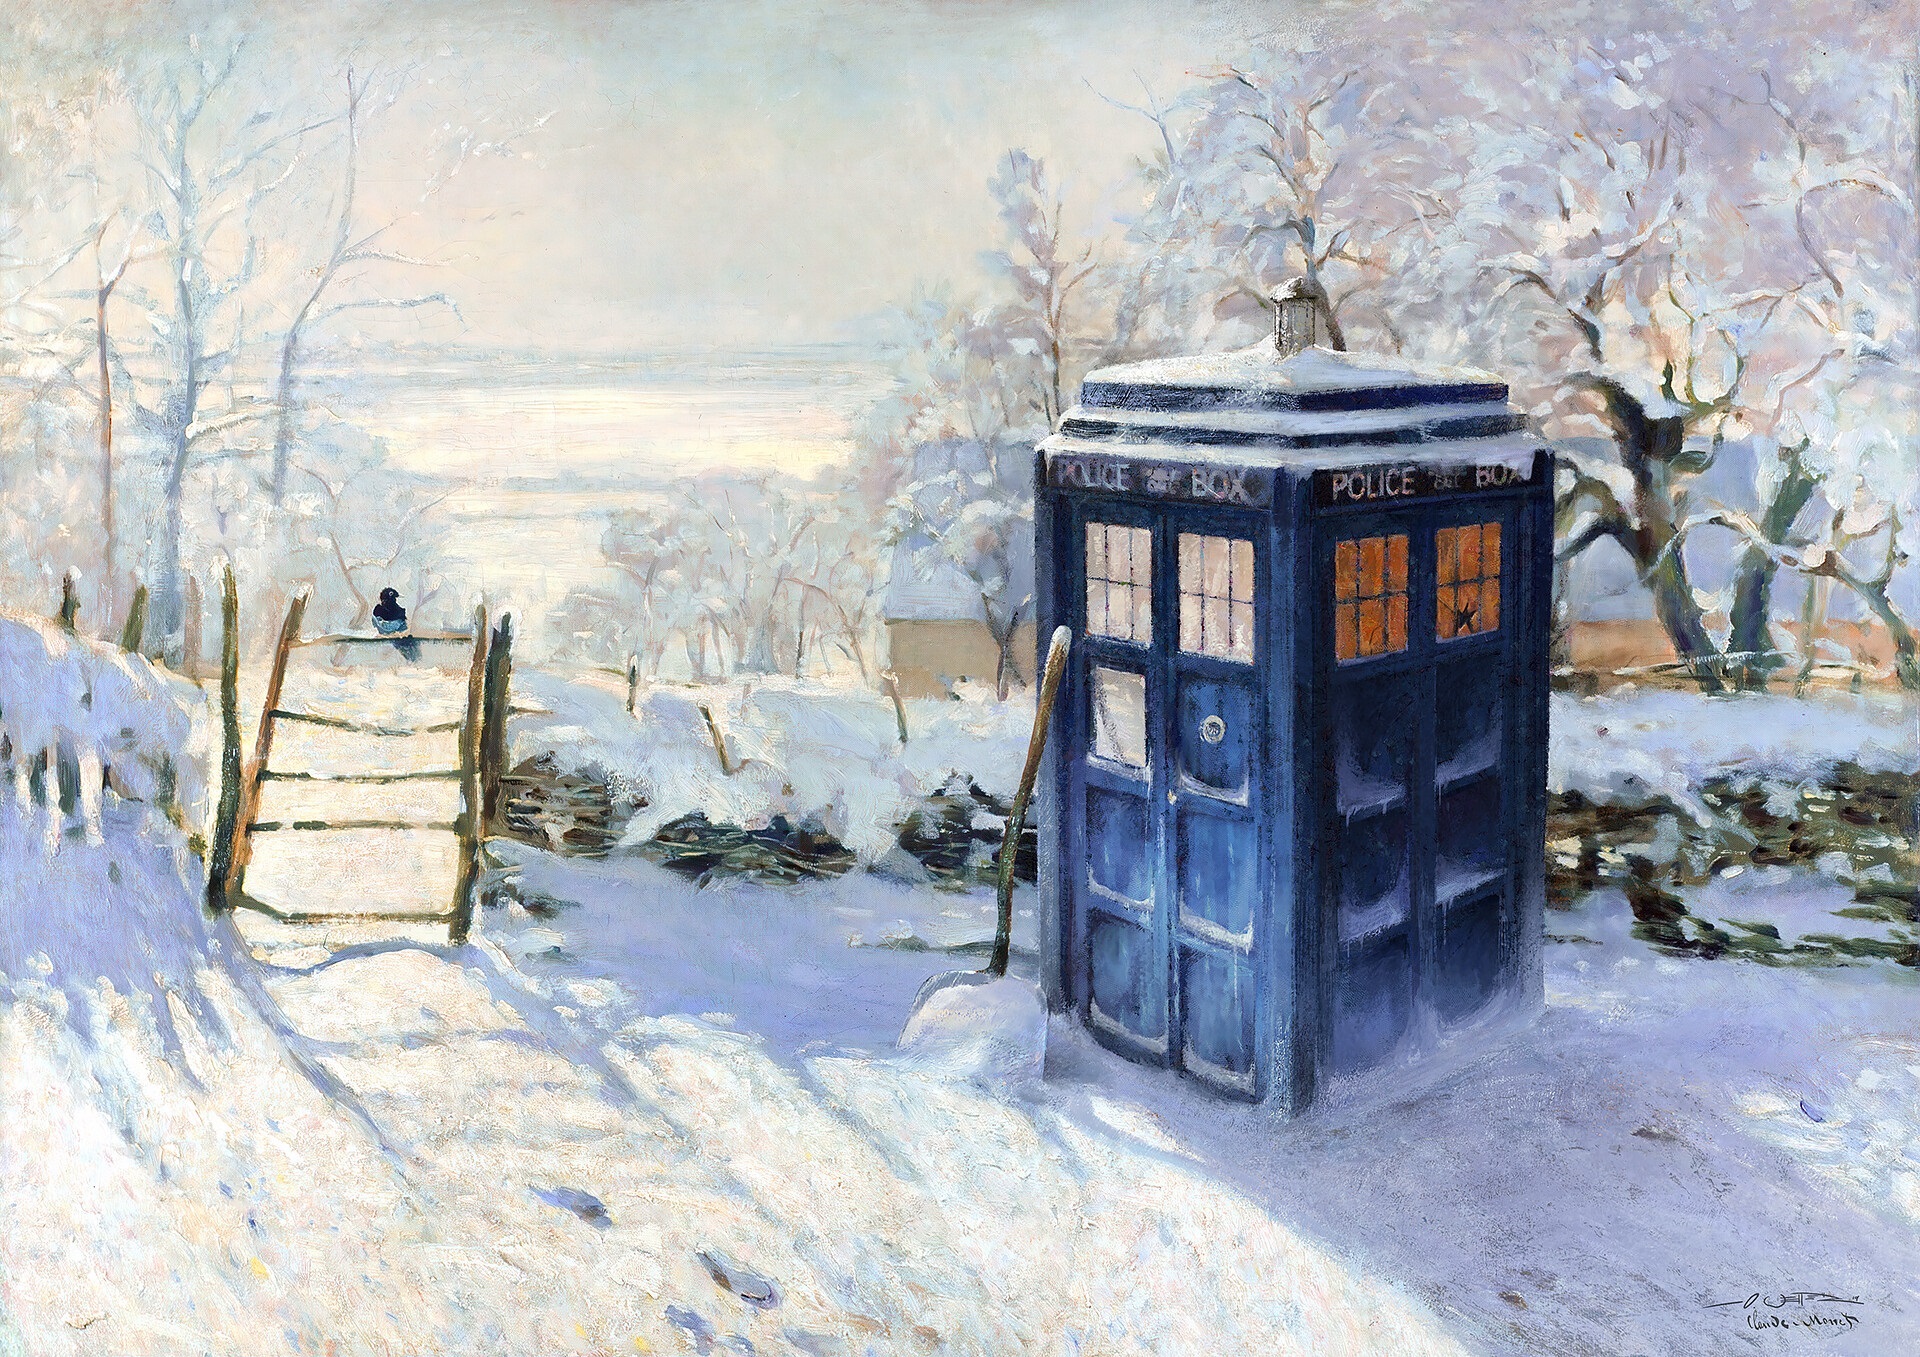 tardis, tv show, doctor who, magpie, painting HD for desktop 1080p